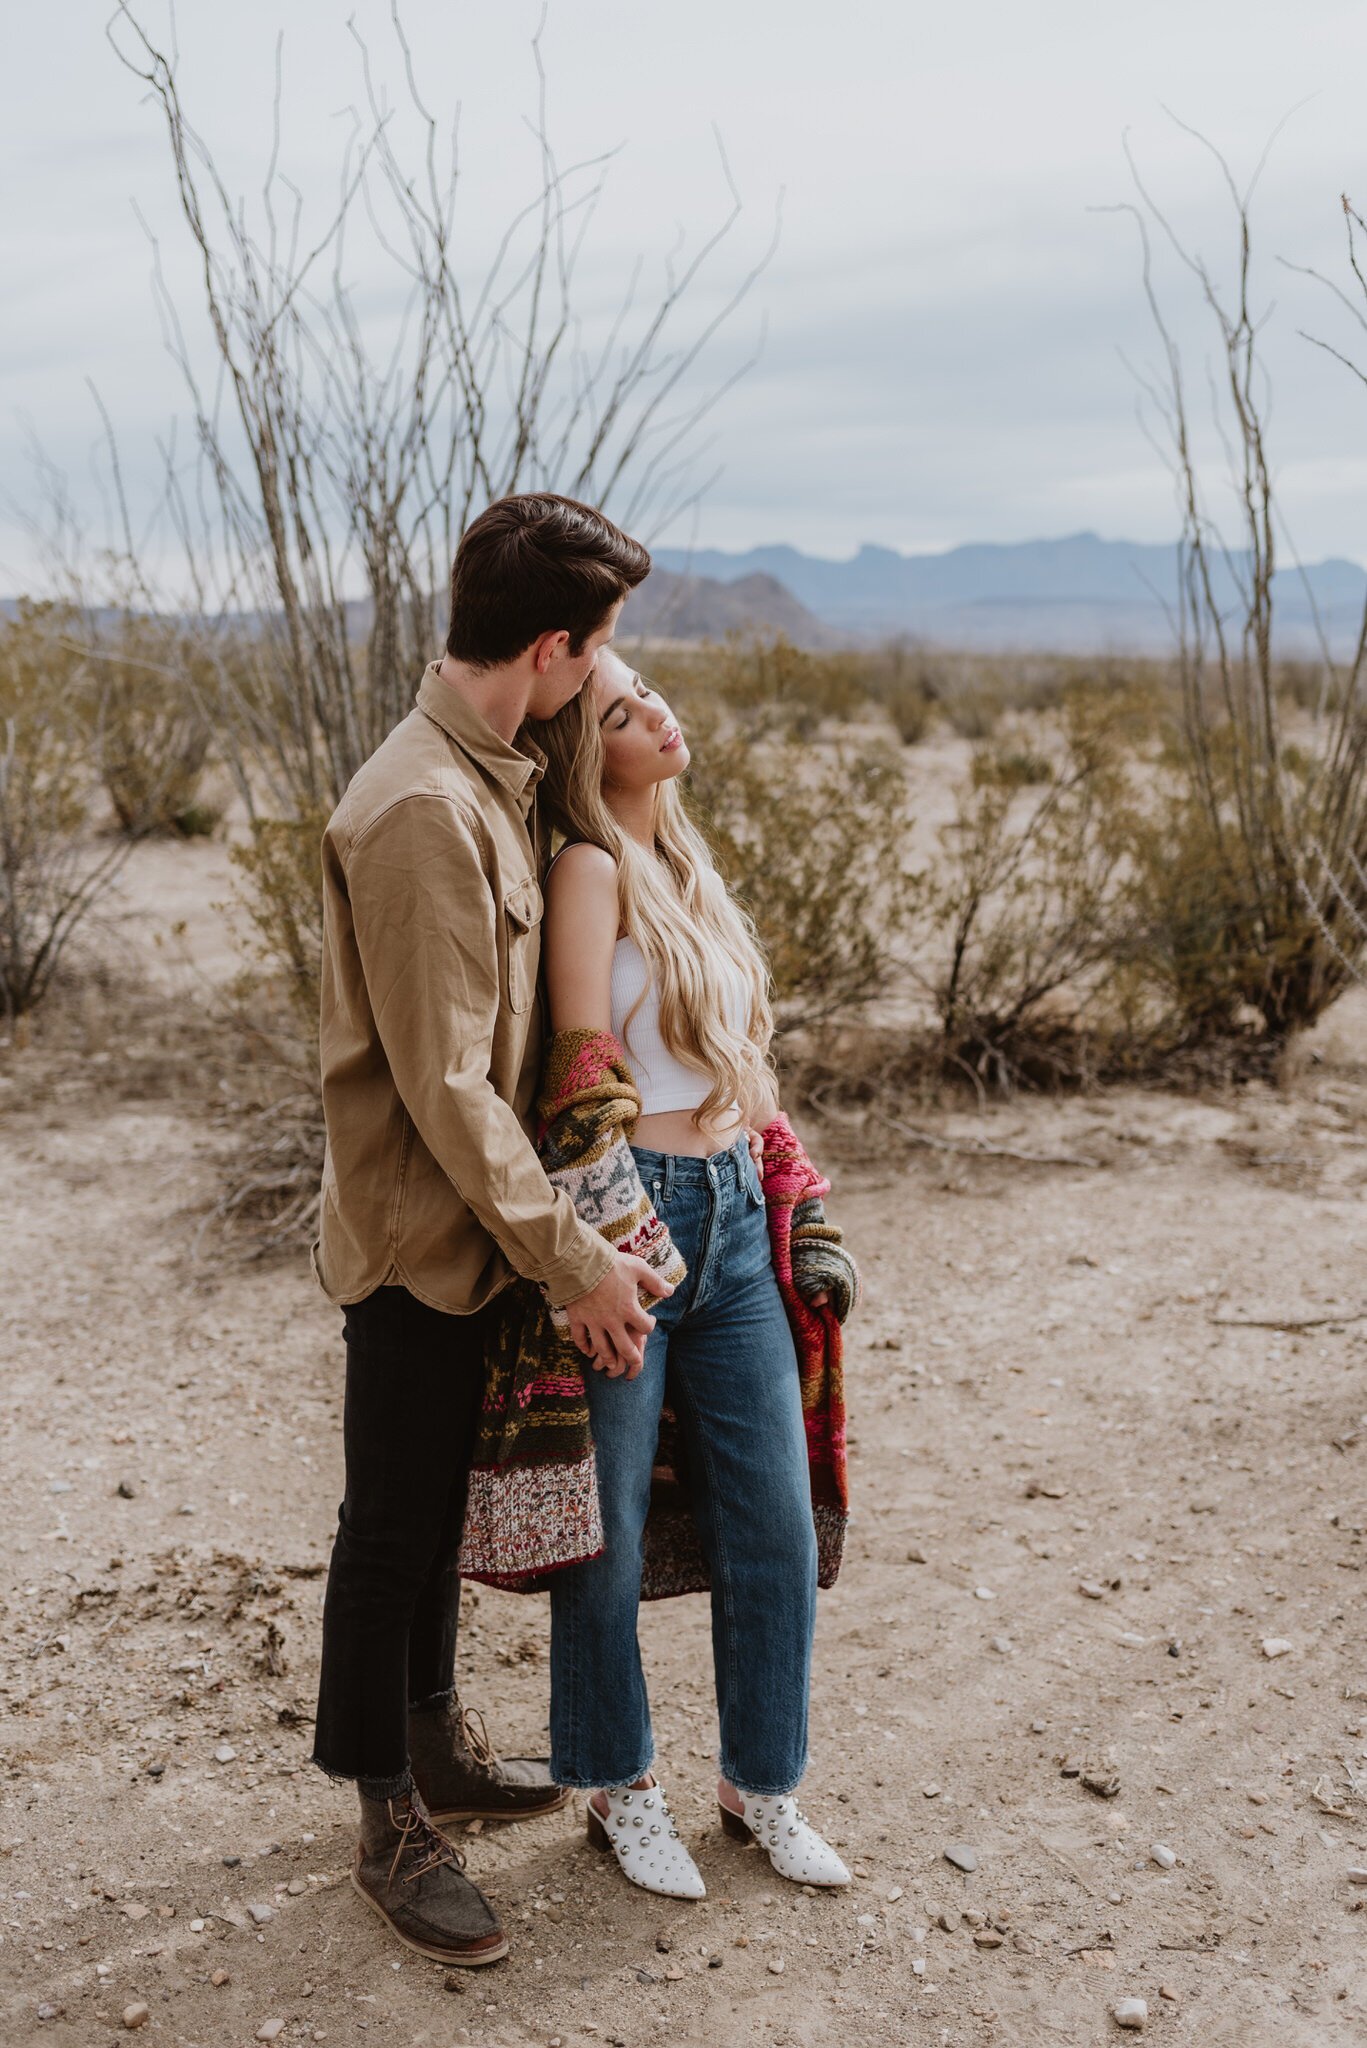 Kaylie-Sirek-Photography-Big-Bend-National-Park-Texas-Engagement-Session-Styled-You-008.jpg